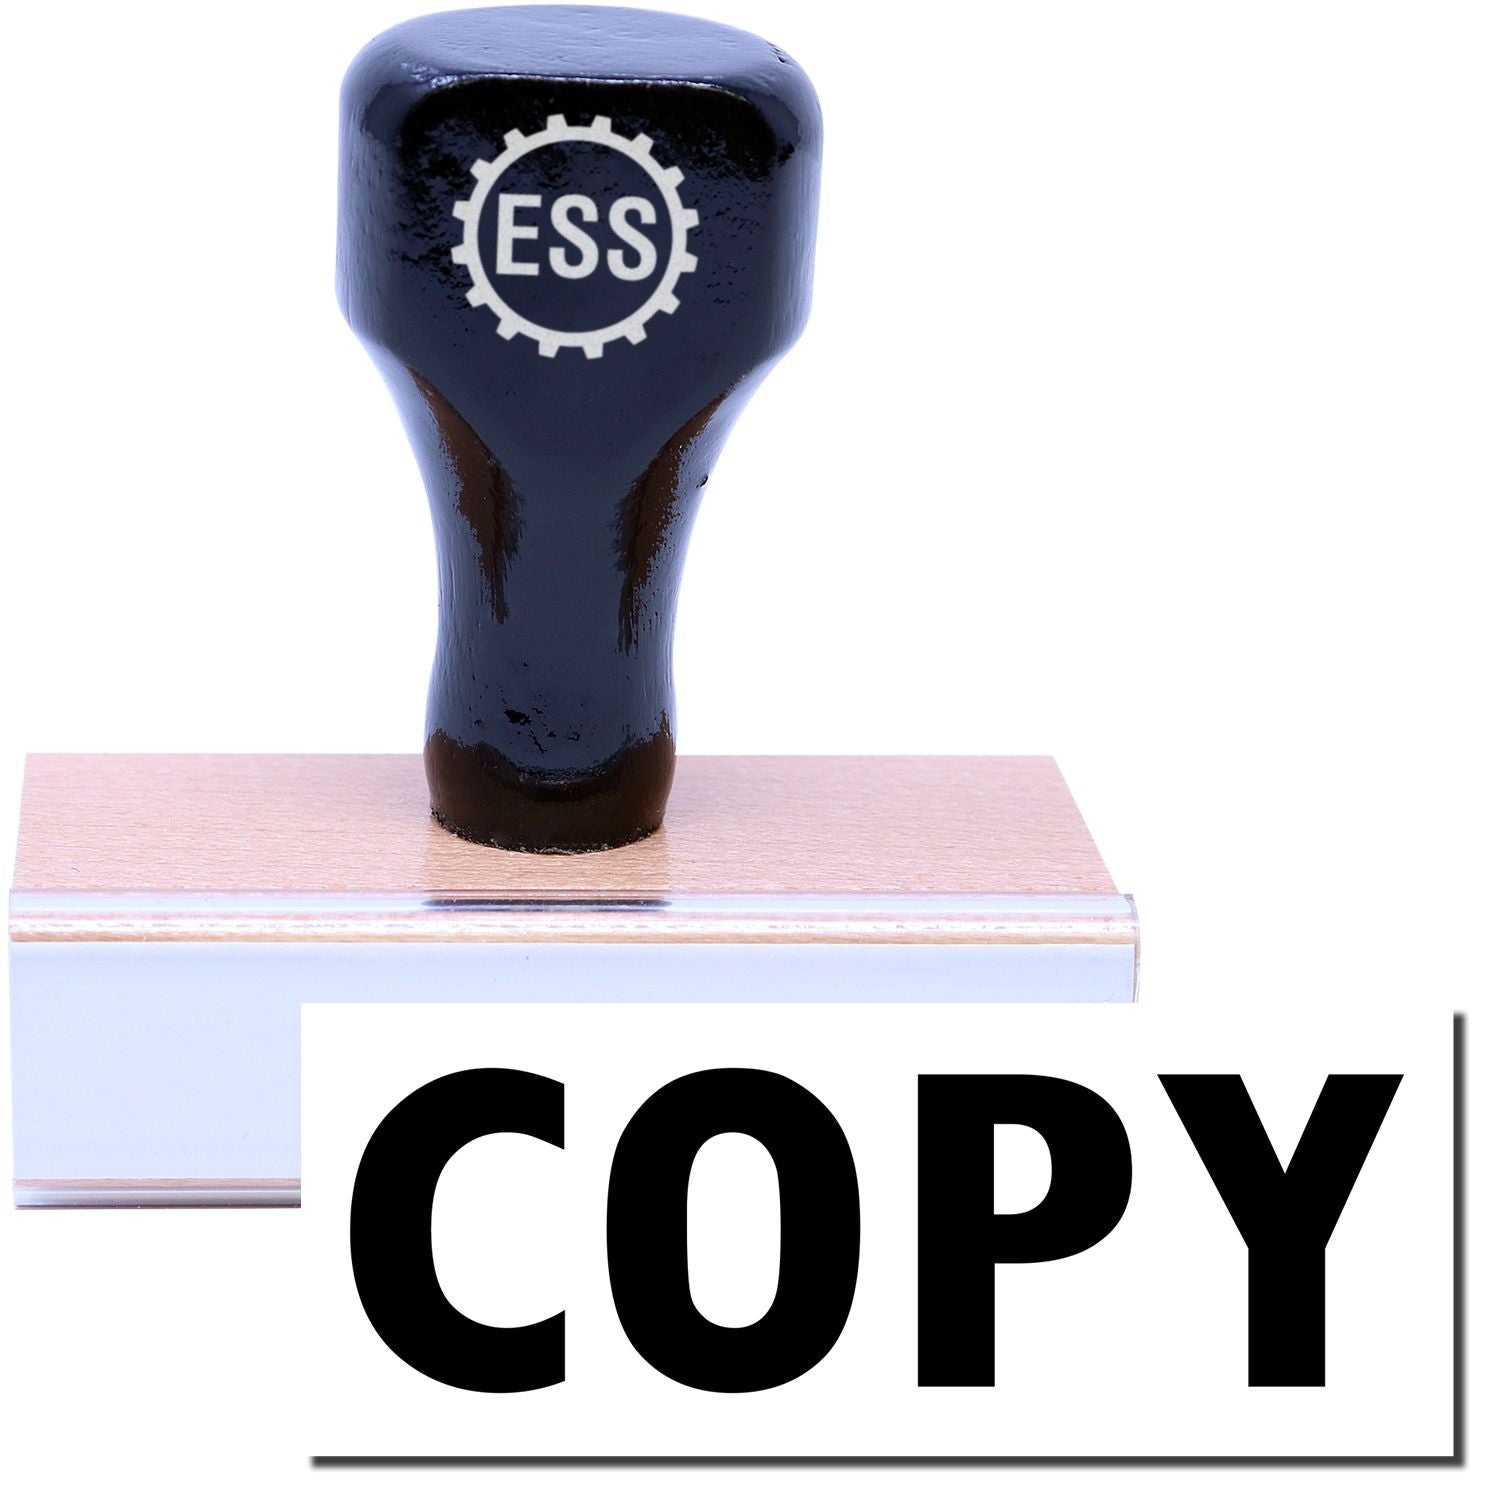 A stock office rubber stamp with a stamped image showing how the text "COPY" is displayed after stamping.